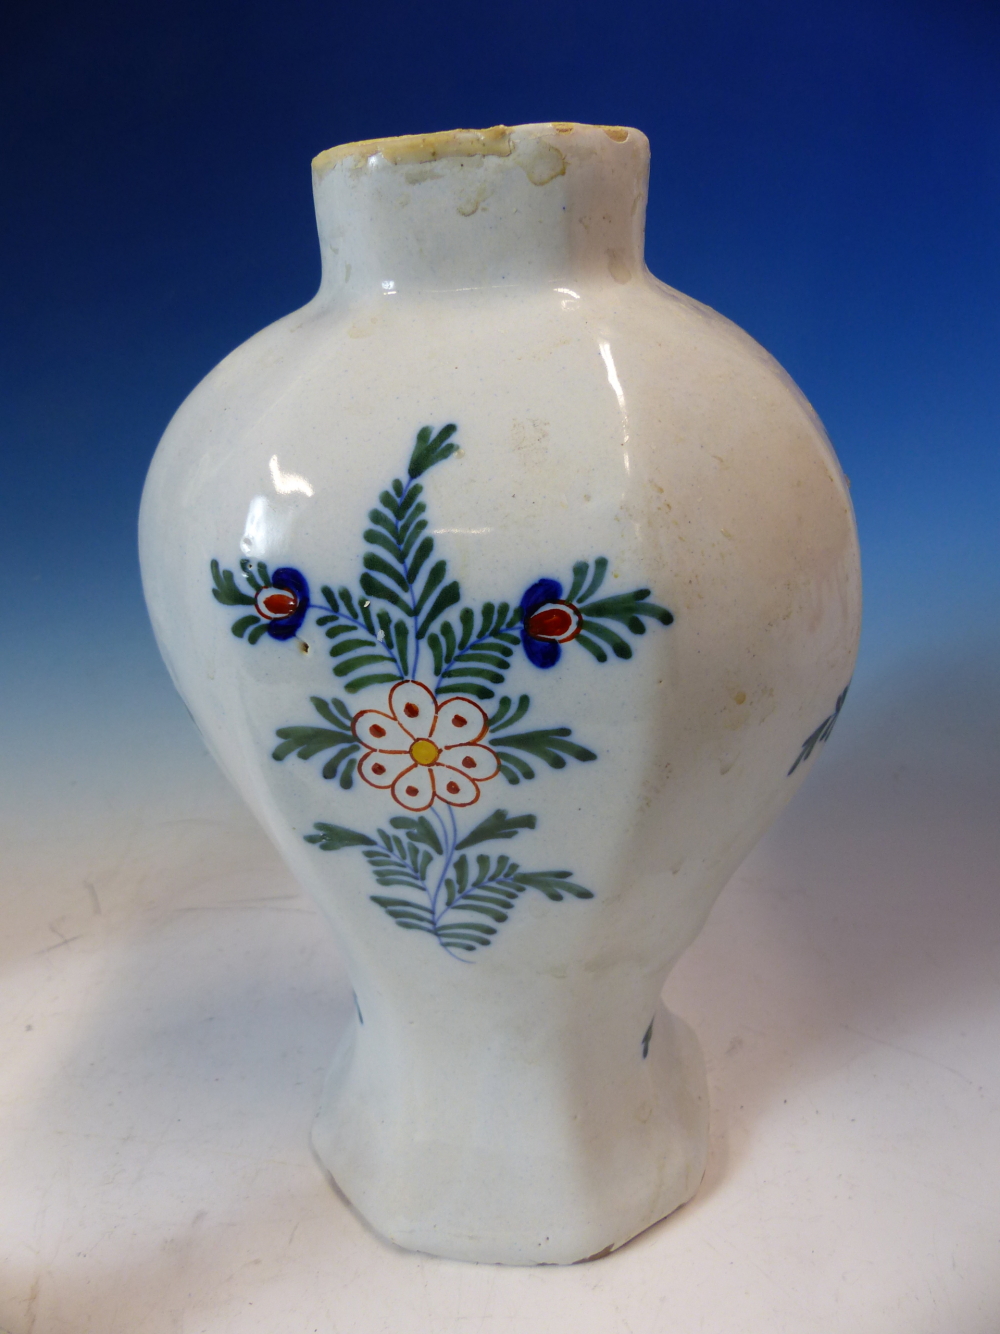 TWO 19th C. DUTCH DELFT POLYCHROME VASES AND COVERS OF FLATTENED BALUSTER SHAPE, ONE PAINTED WITH - Image 14 of 14